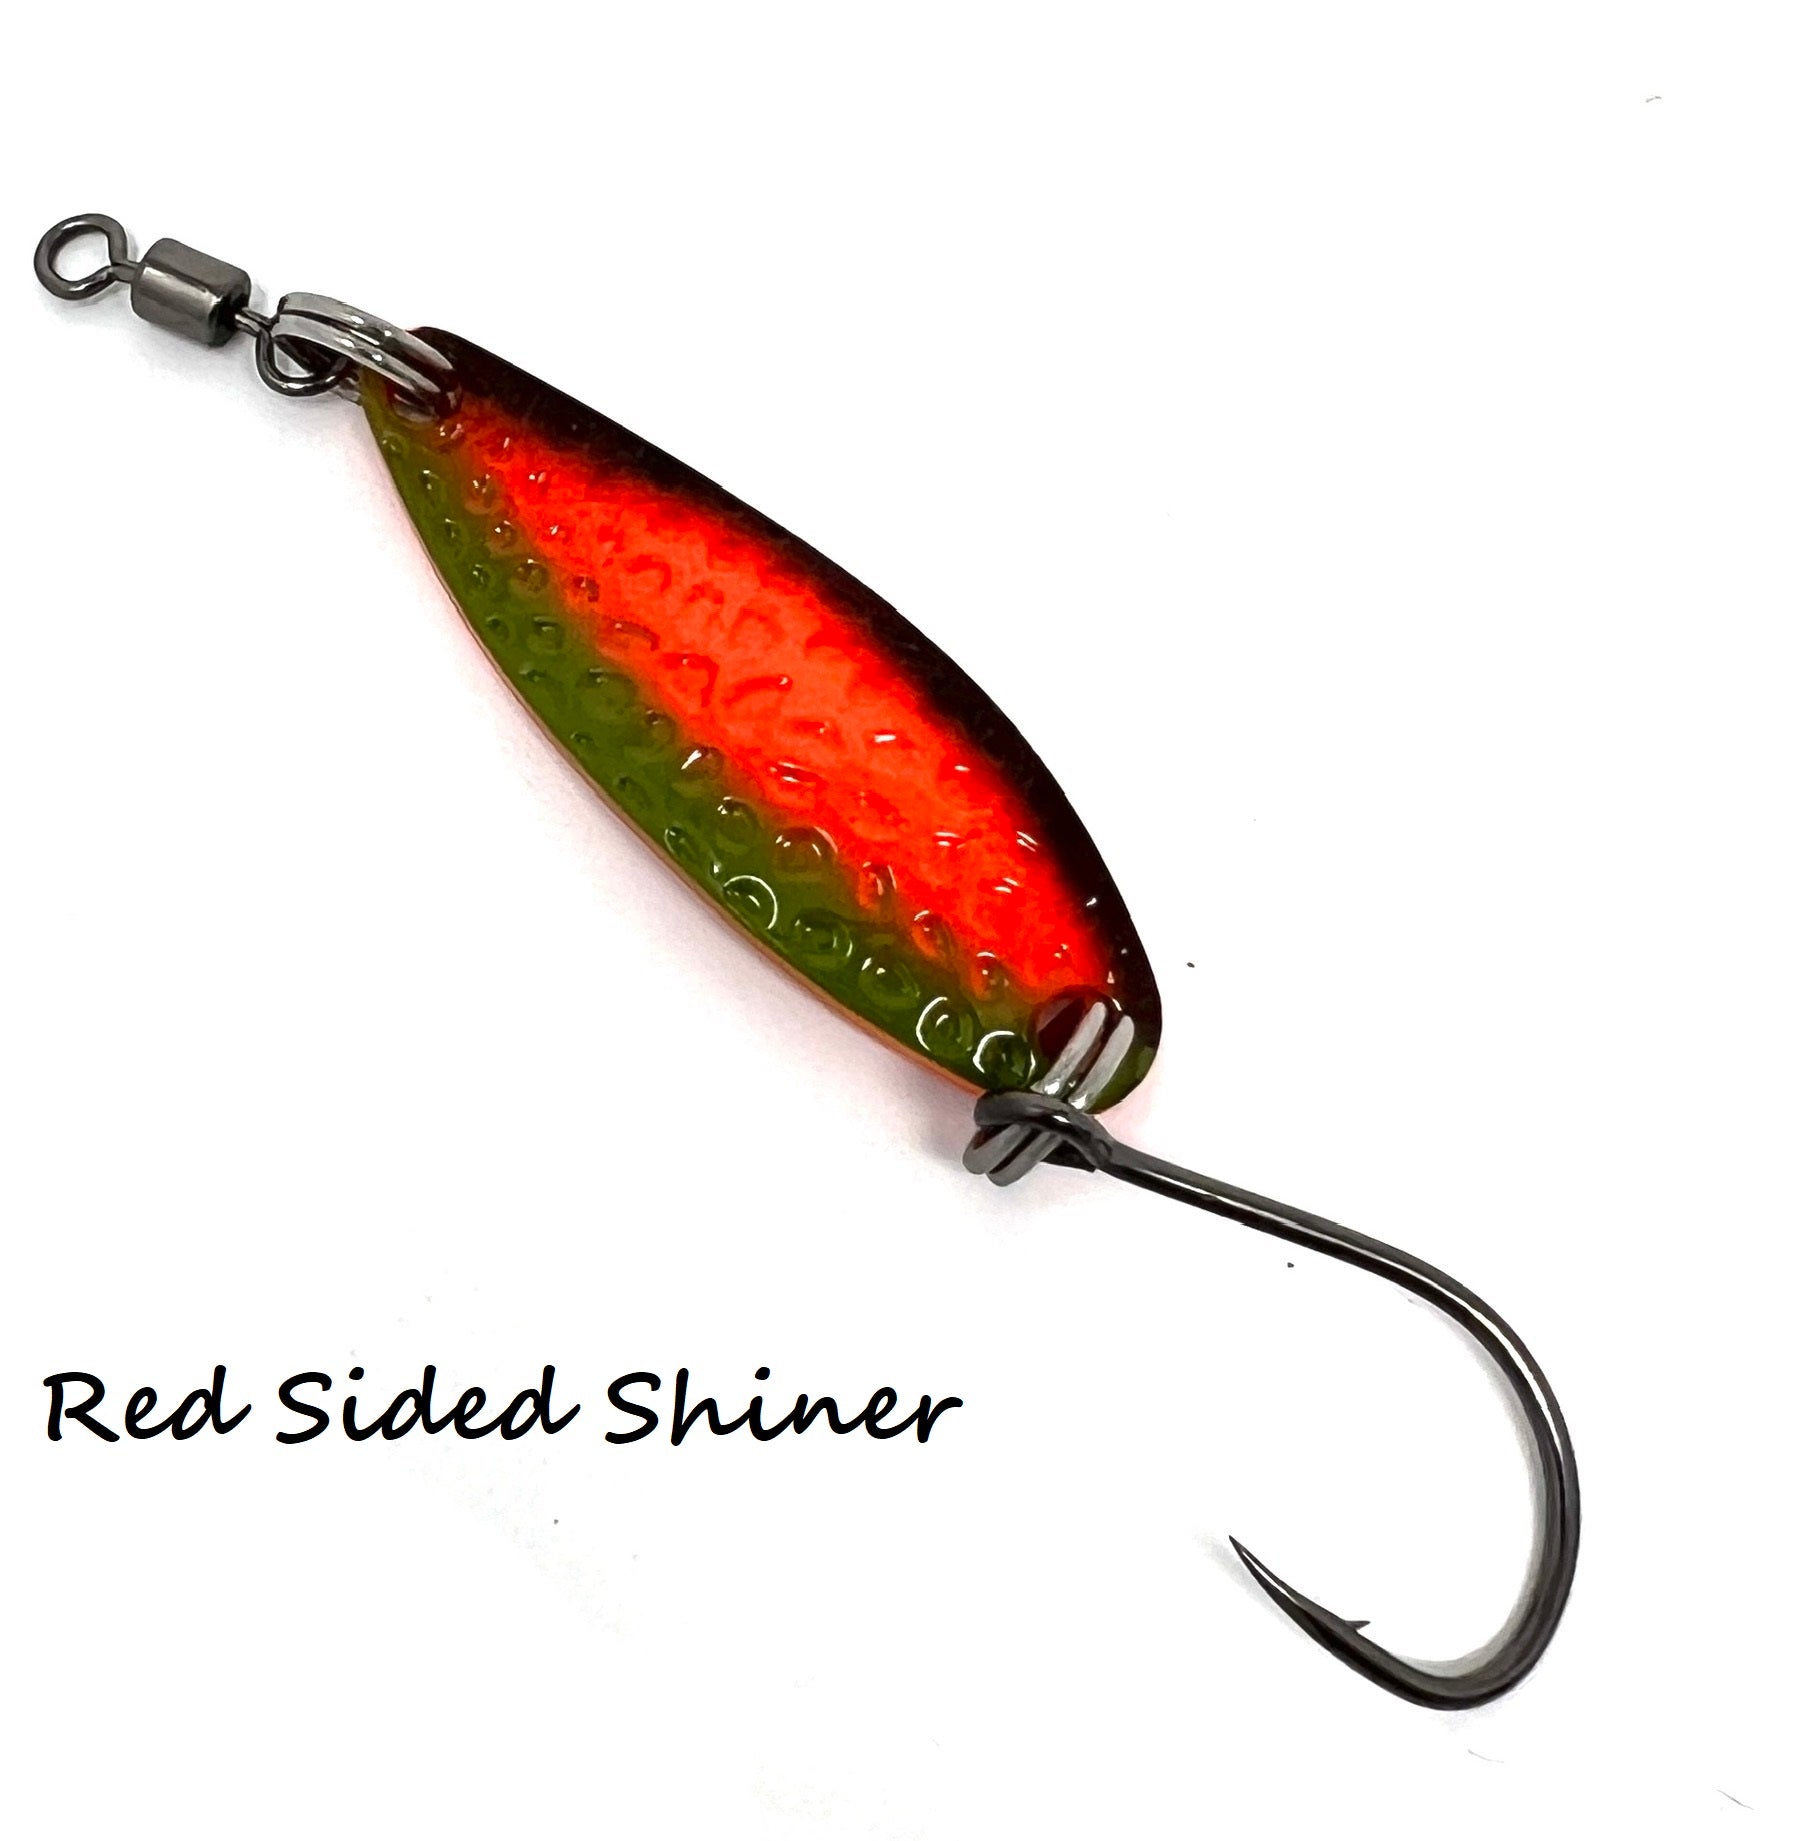 The Wiggler – Prime Lures Co.